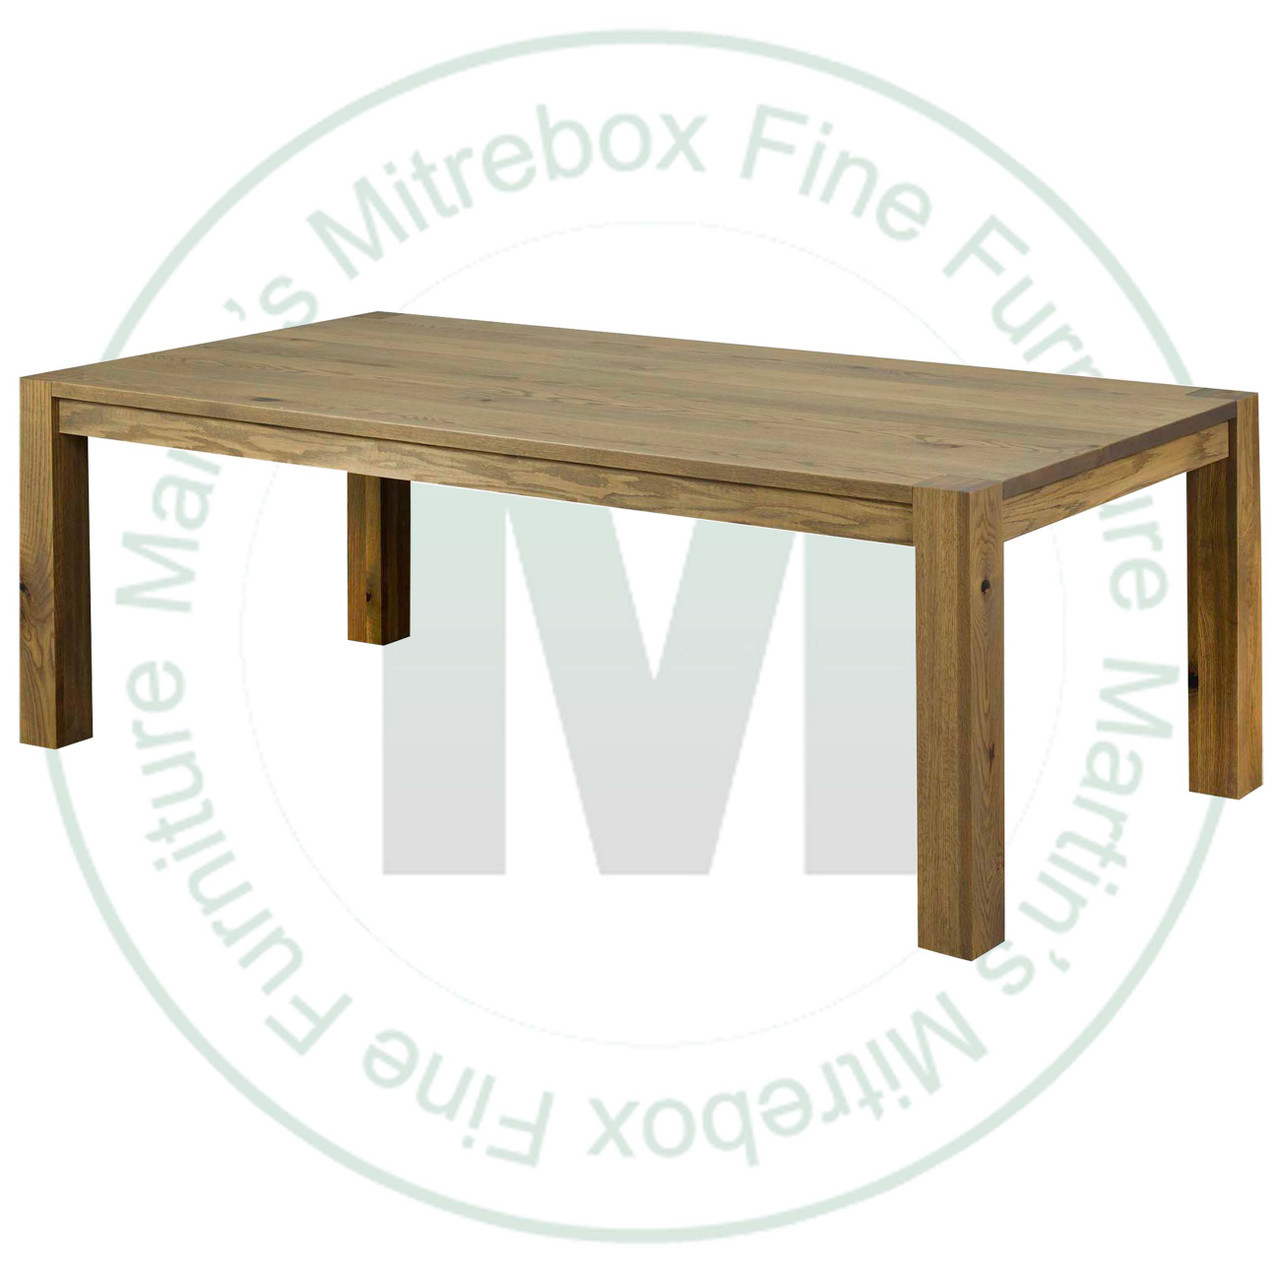 Oak West End Extension Harvest Table 60''D x 60''W x 30''H With 2 - 12'' Leaves